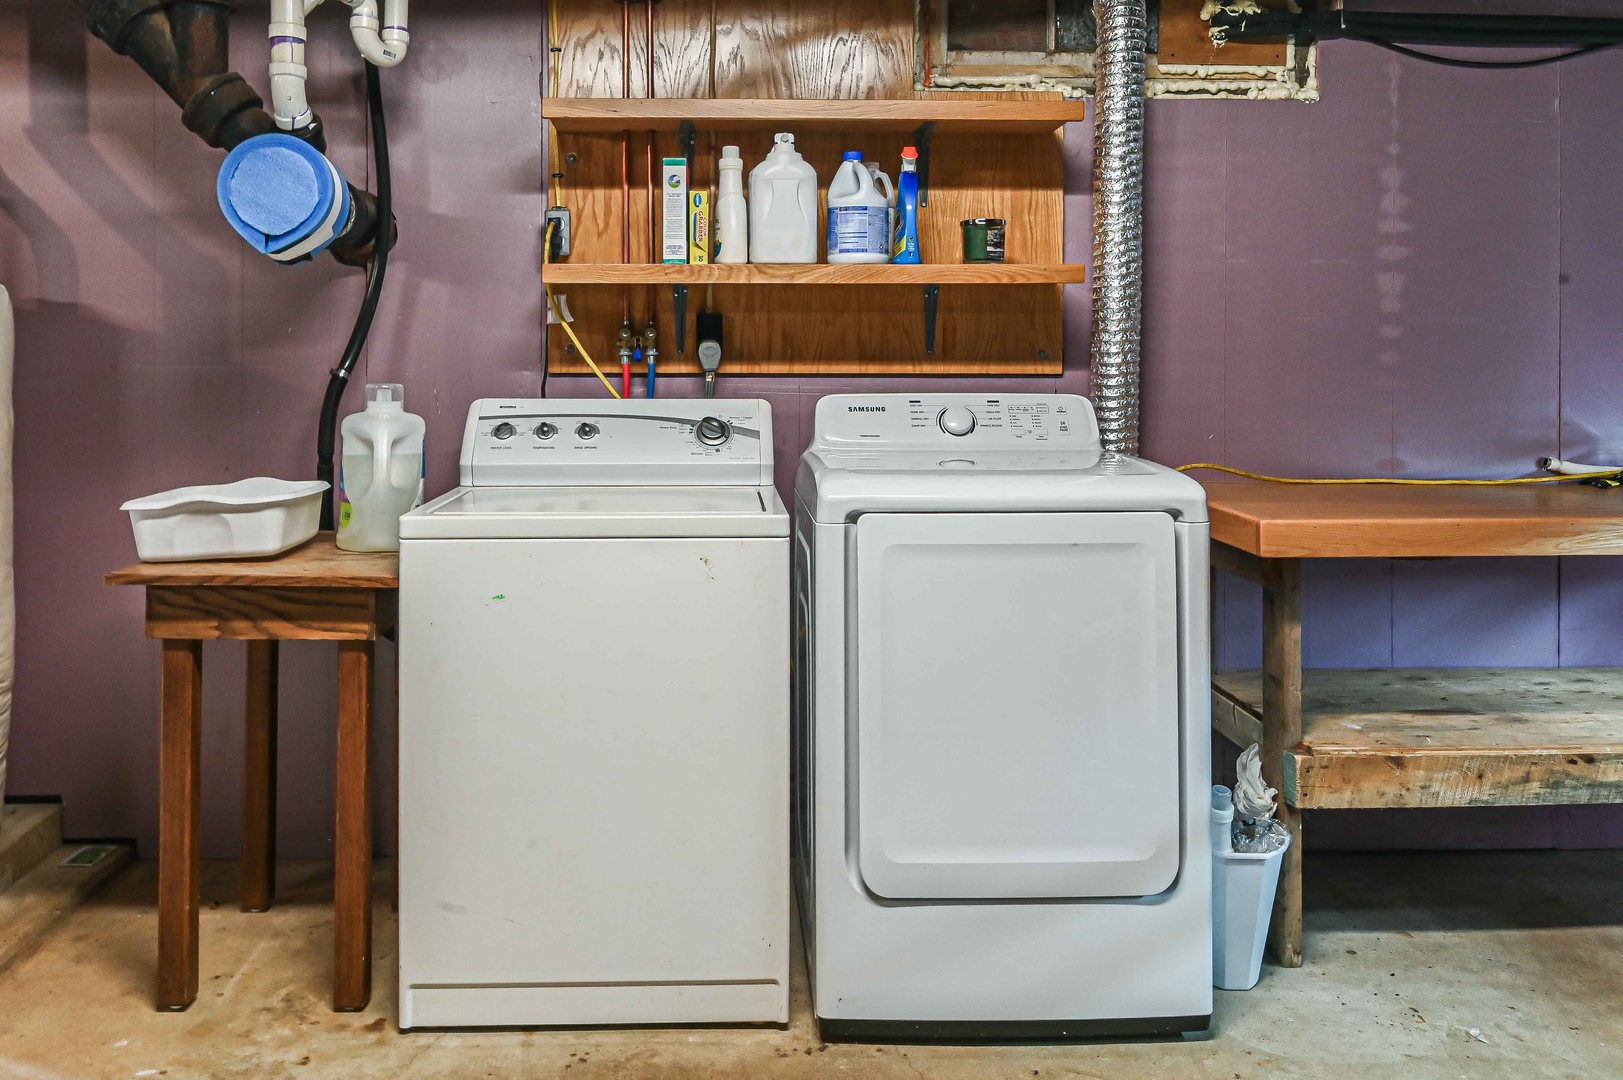 Washer and dryer in the basement